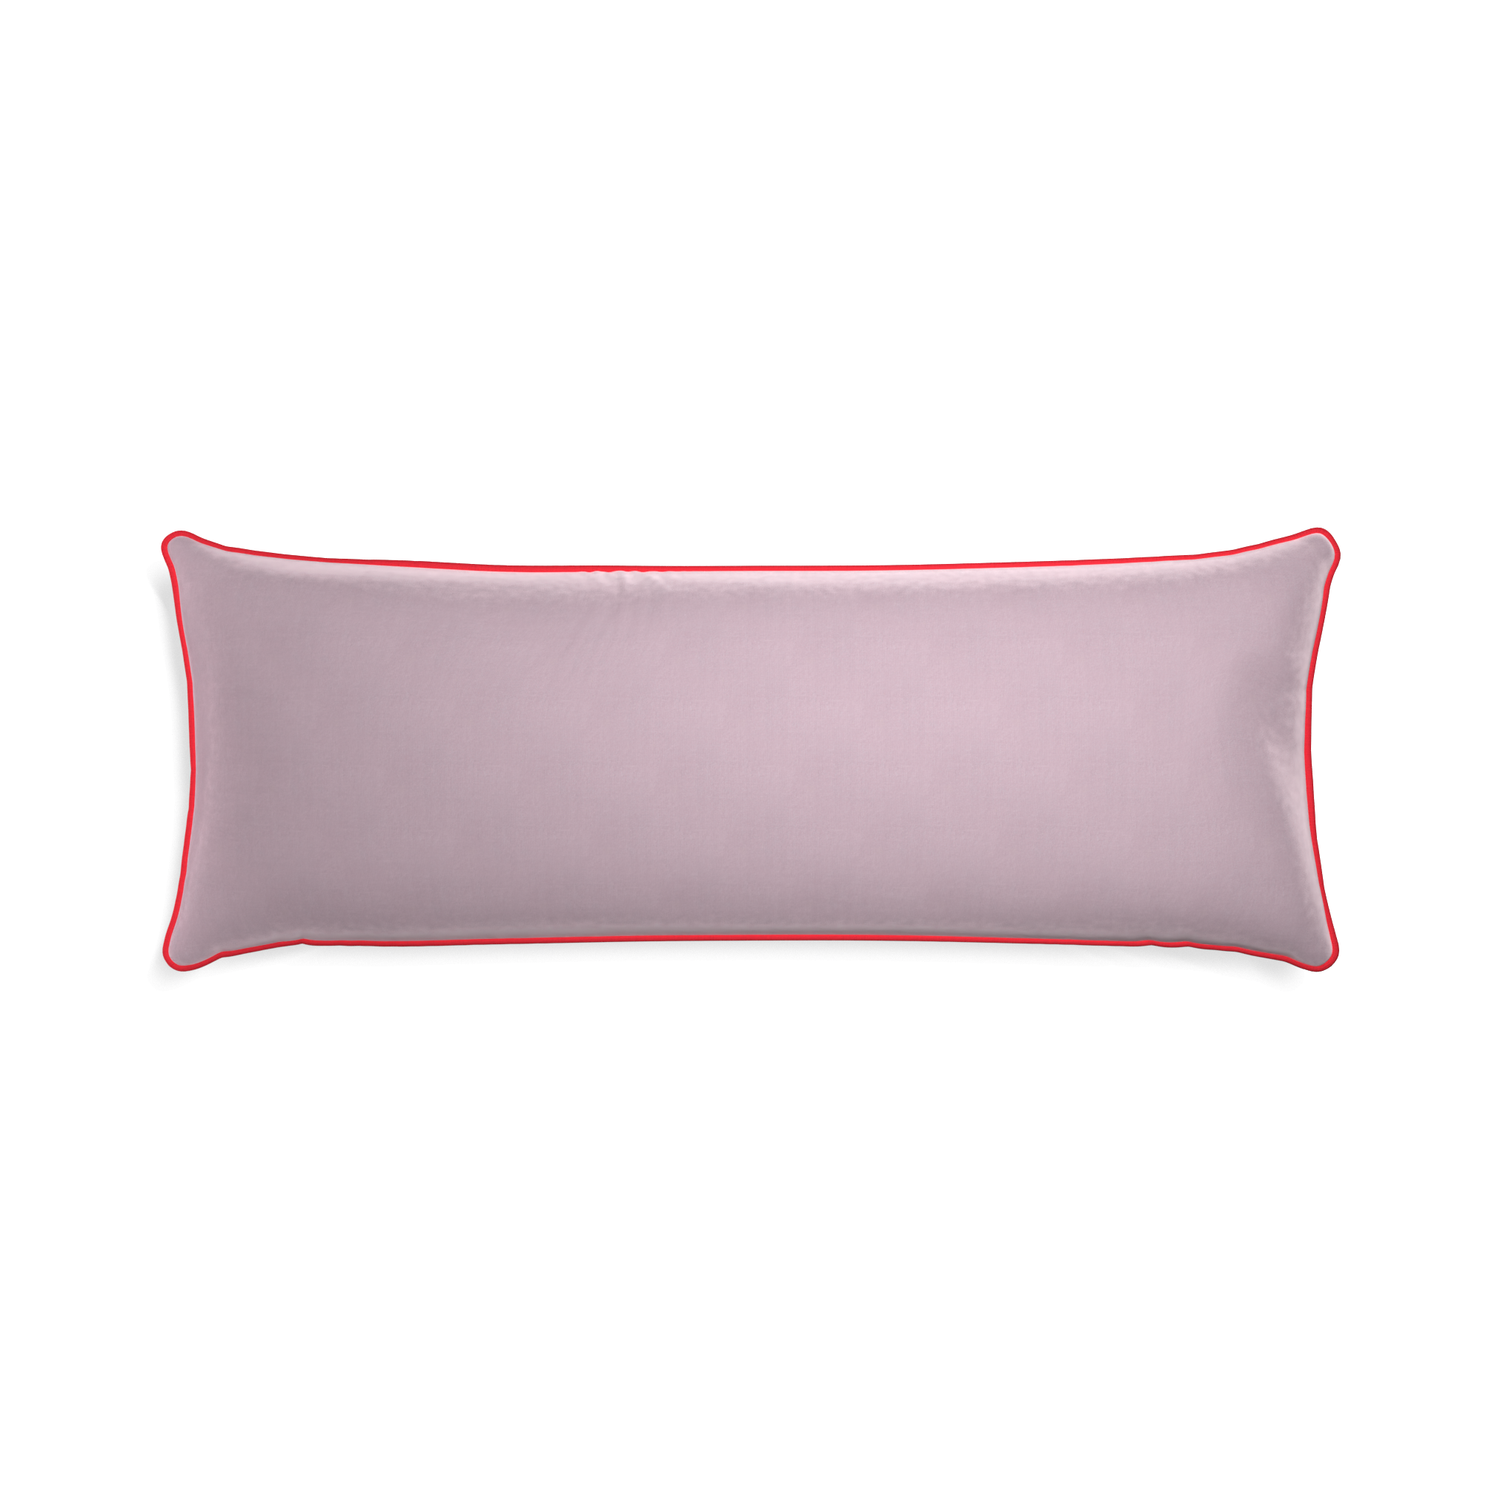 Xl-lumbar lilac velvet custom lilacpillow with cherry piping on white background